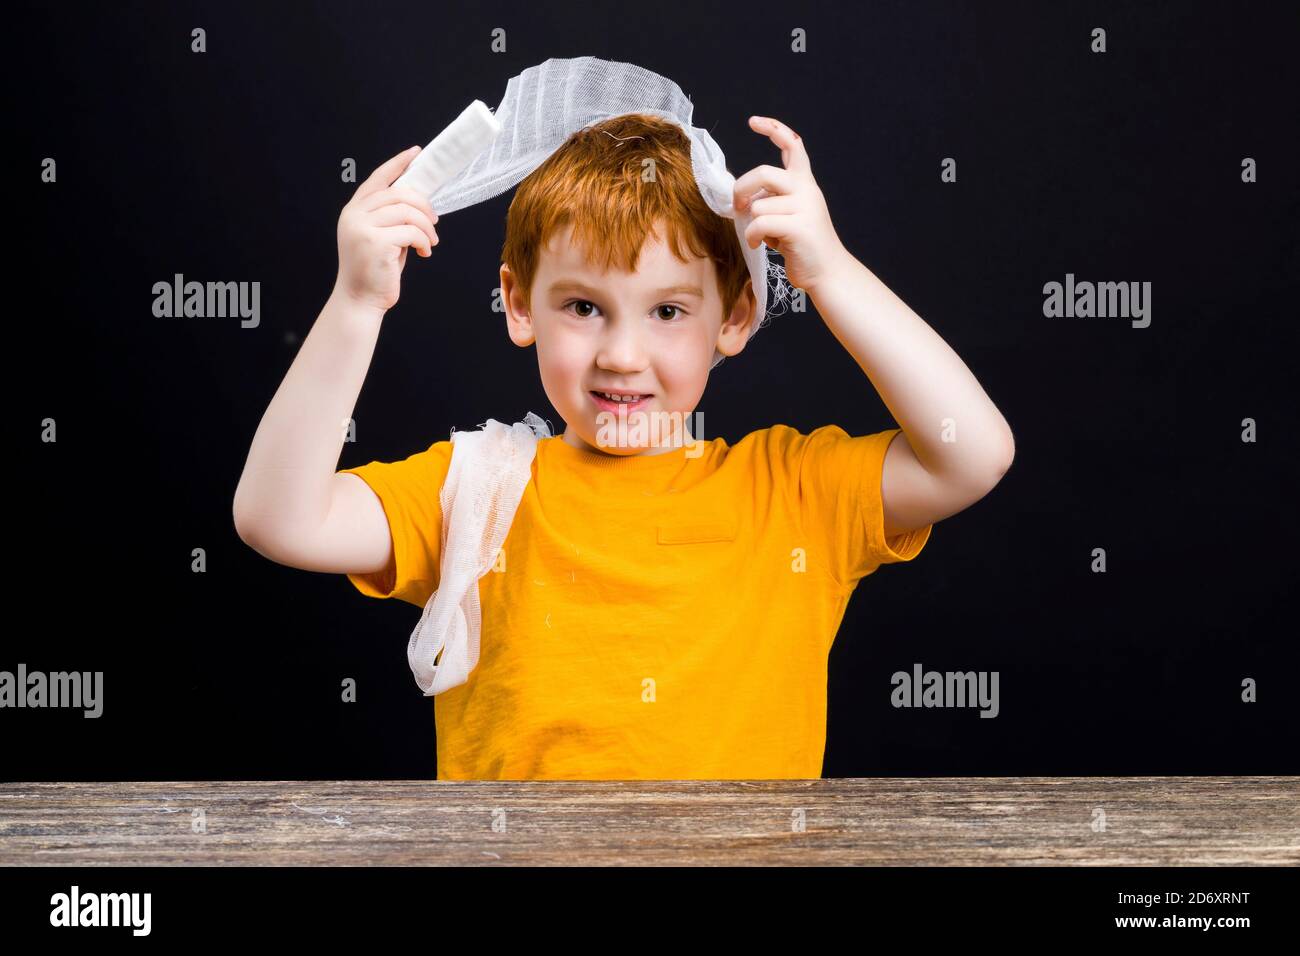 a beautiful boy with red hair with a damaged head bandages himself with a medical bandage, a boy with medical equipment during self-treatment, closeup Stock Photo